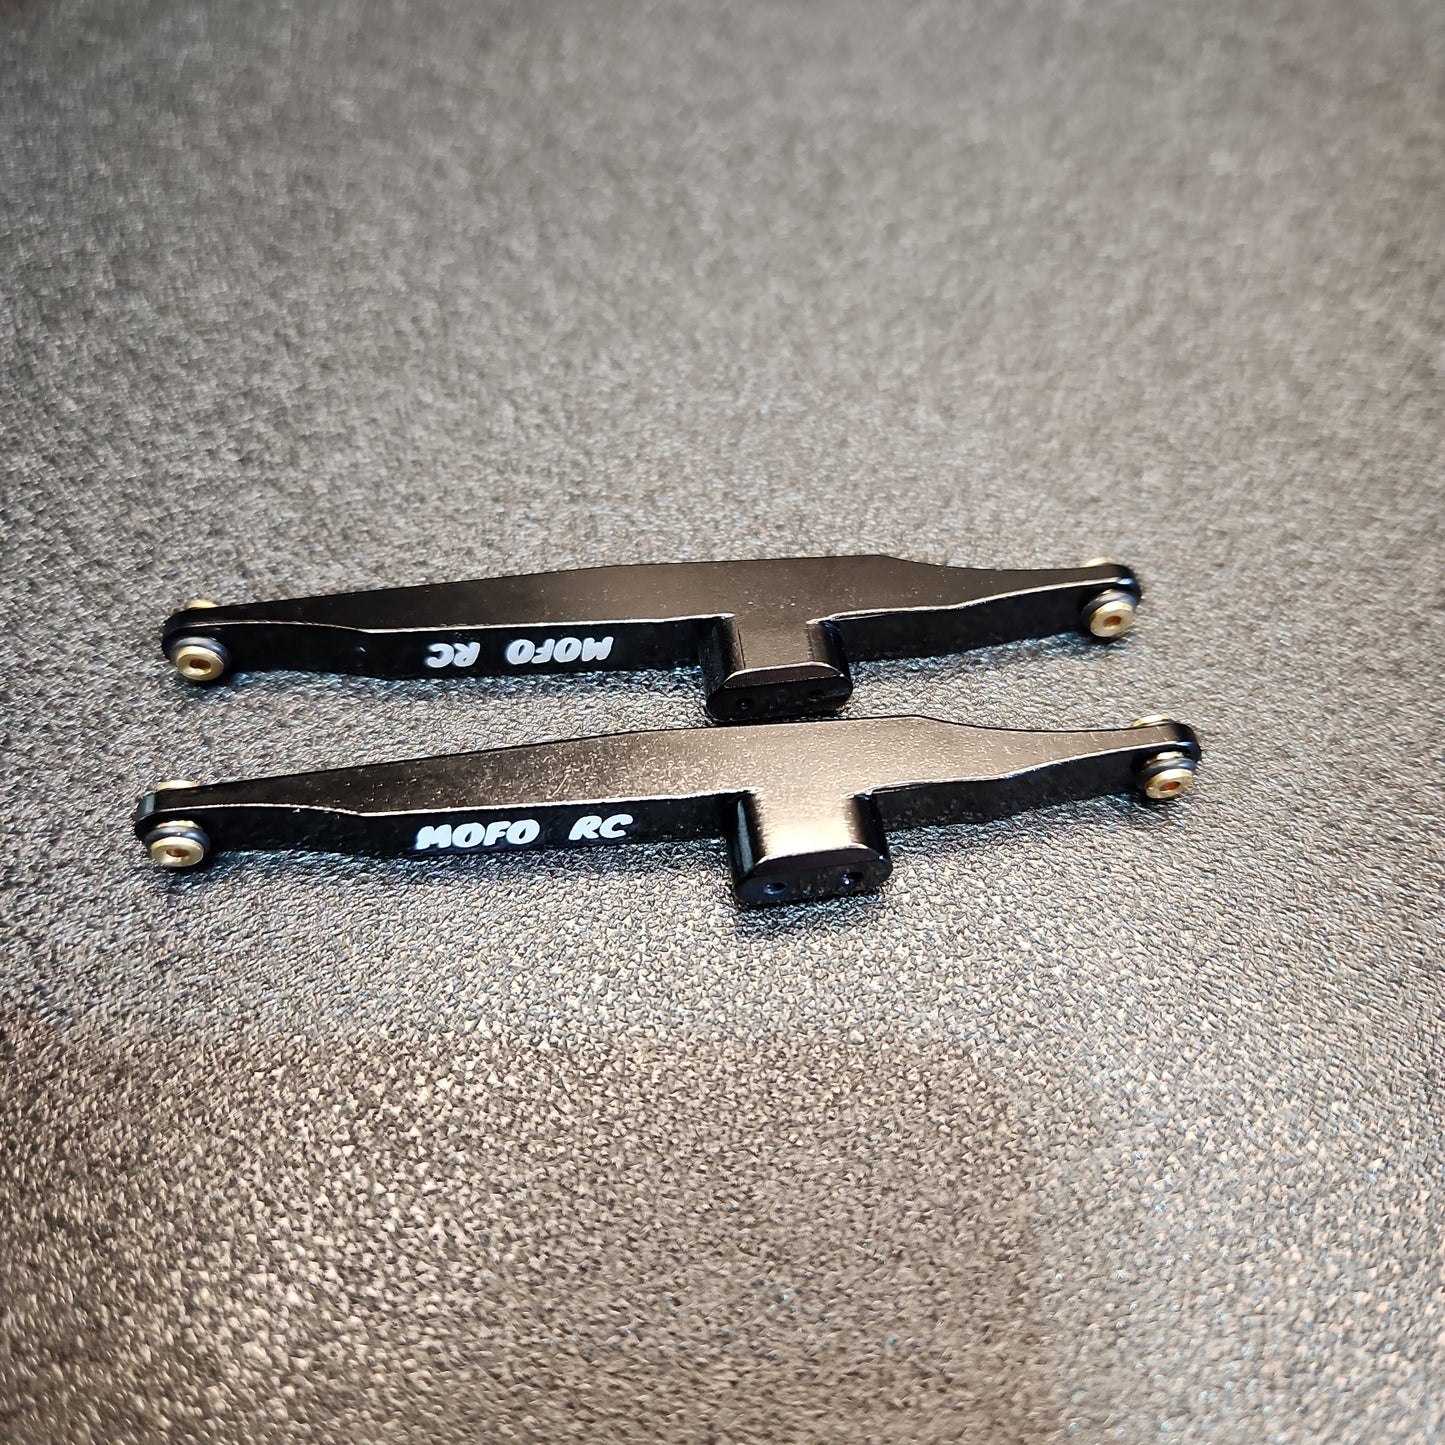 Aluminum Links Trailing Arms for axial scx24